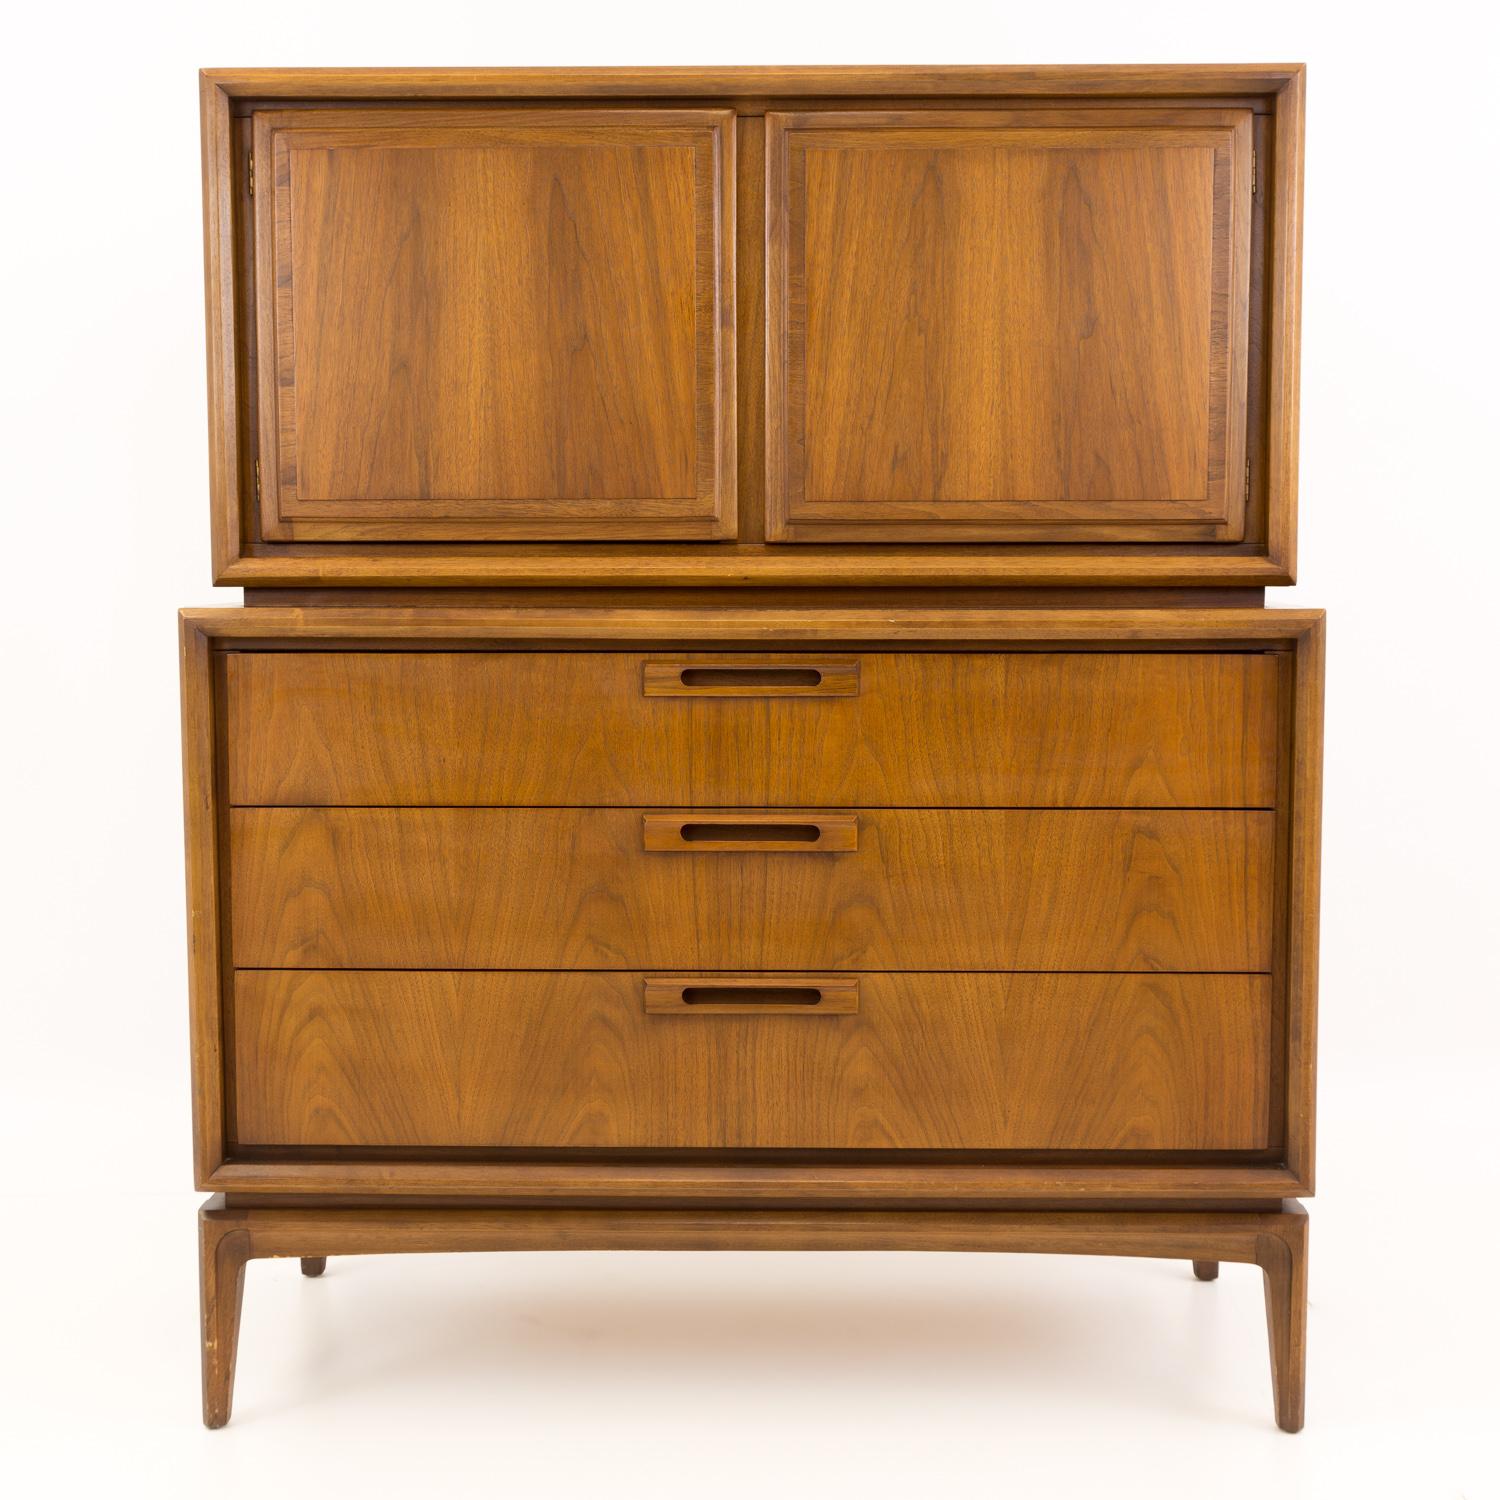 United Furniture Mid Century Walnut Highboy Dresser

This dresser measures: 42 wide x 19 deep x 50.75 inches high

All pieces of furniture can be had in what we call restored vintage condition. That means the piece is restored upon purchase so